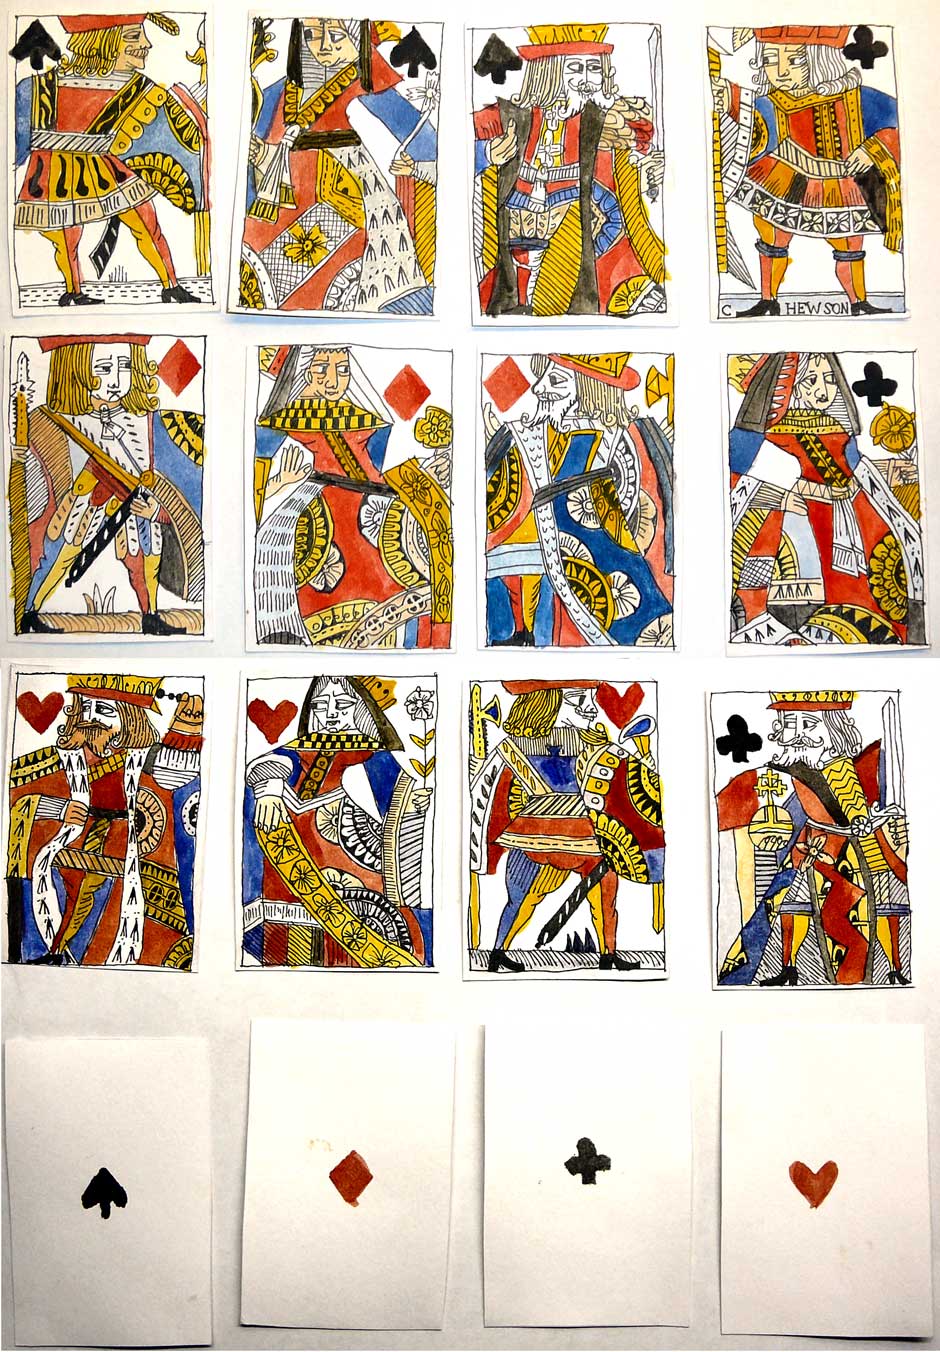 hand-drawn and painted “Hewson Facsimile Playing Cards” made by David James Binns